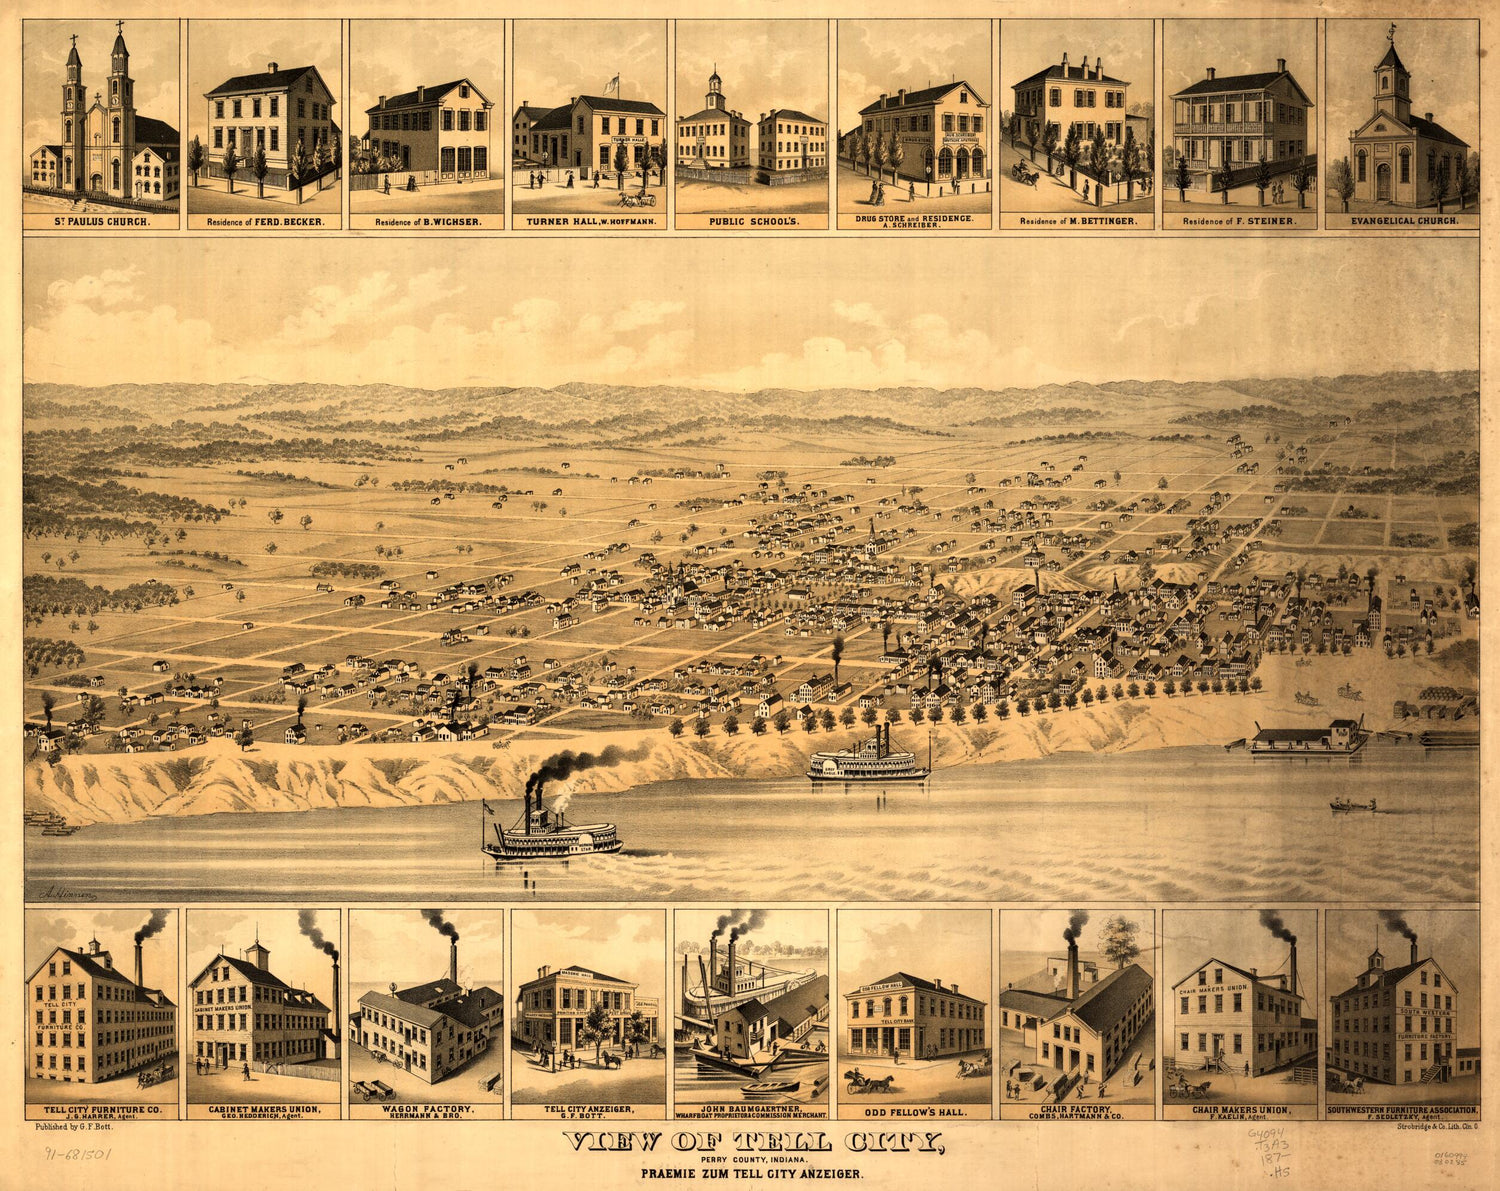 This old map of View of Tell City, Perry County, Indiana : Praemie Zum Tell City Anzeiger from 1870 was created by G. F. Bott, A. Hinnen,  Strobridge &amp; Co. Lith in 1870